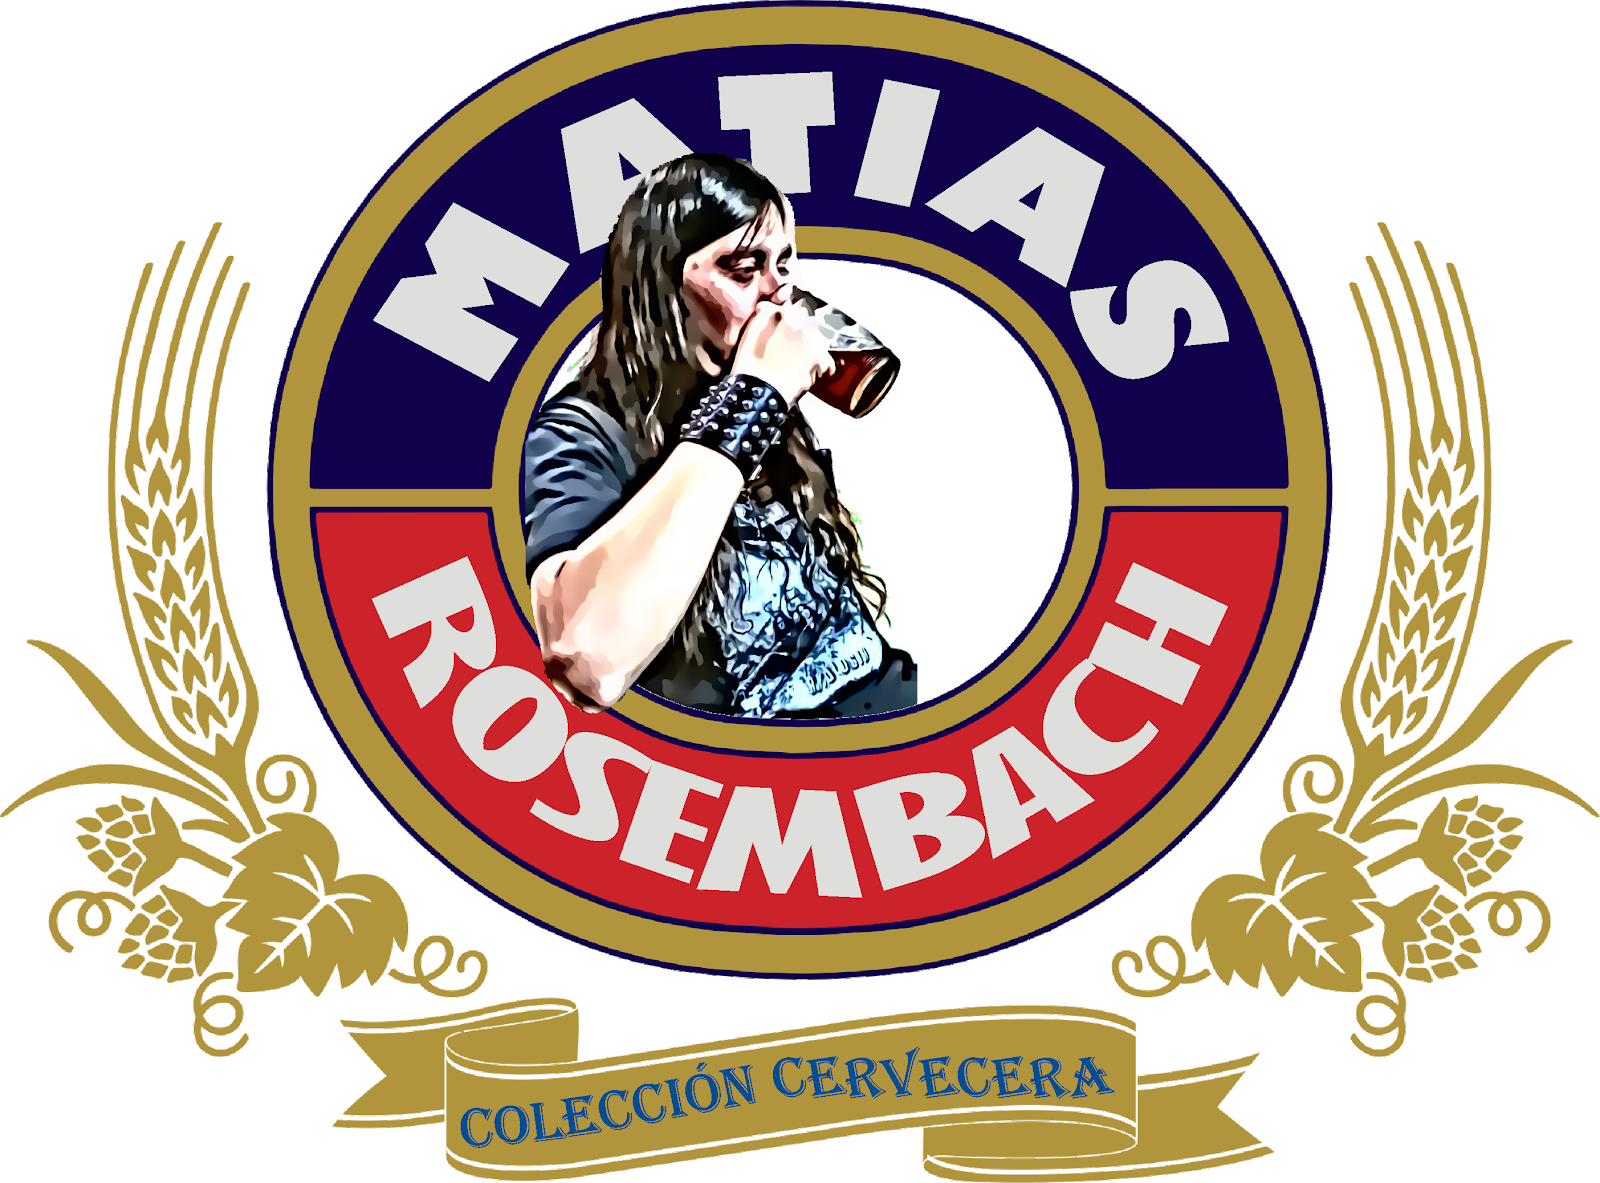 Rosembach Beer Collection